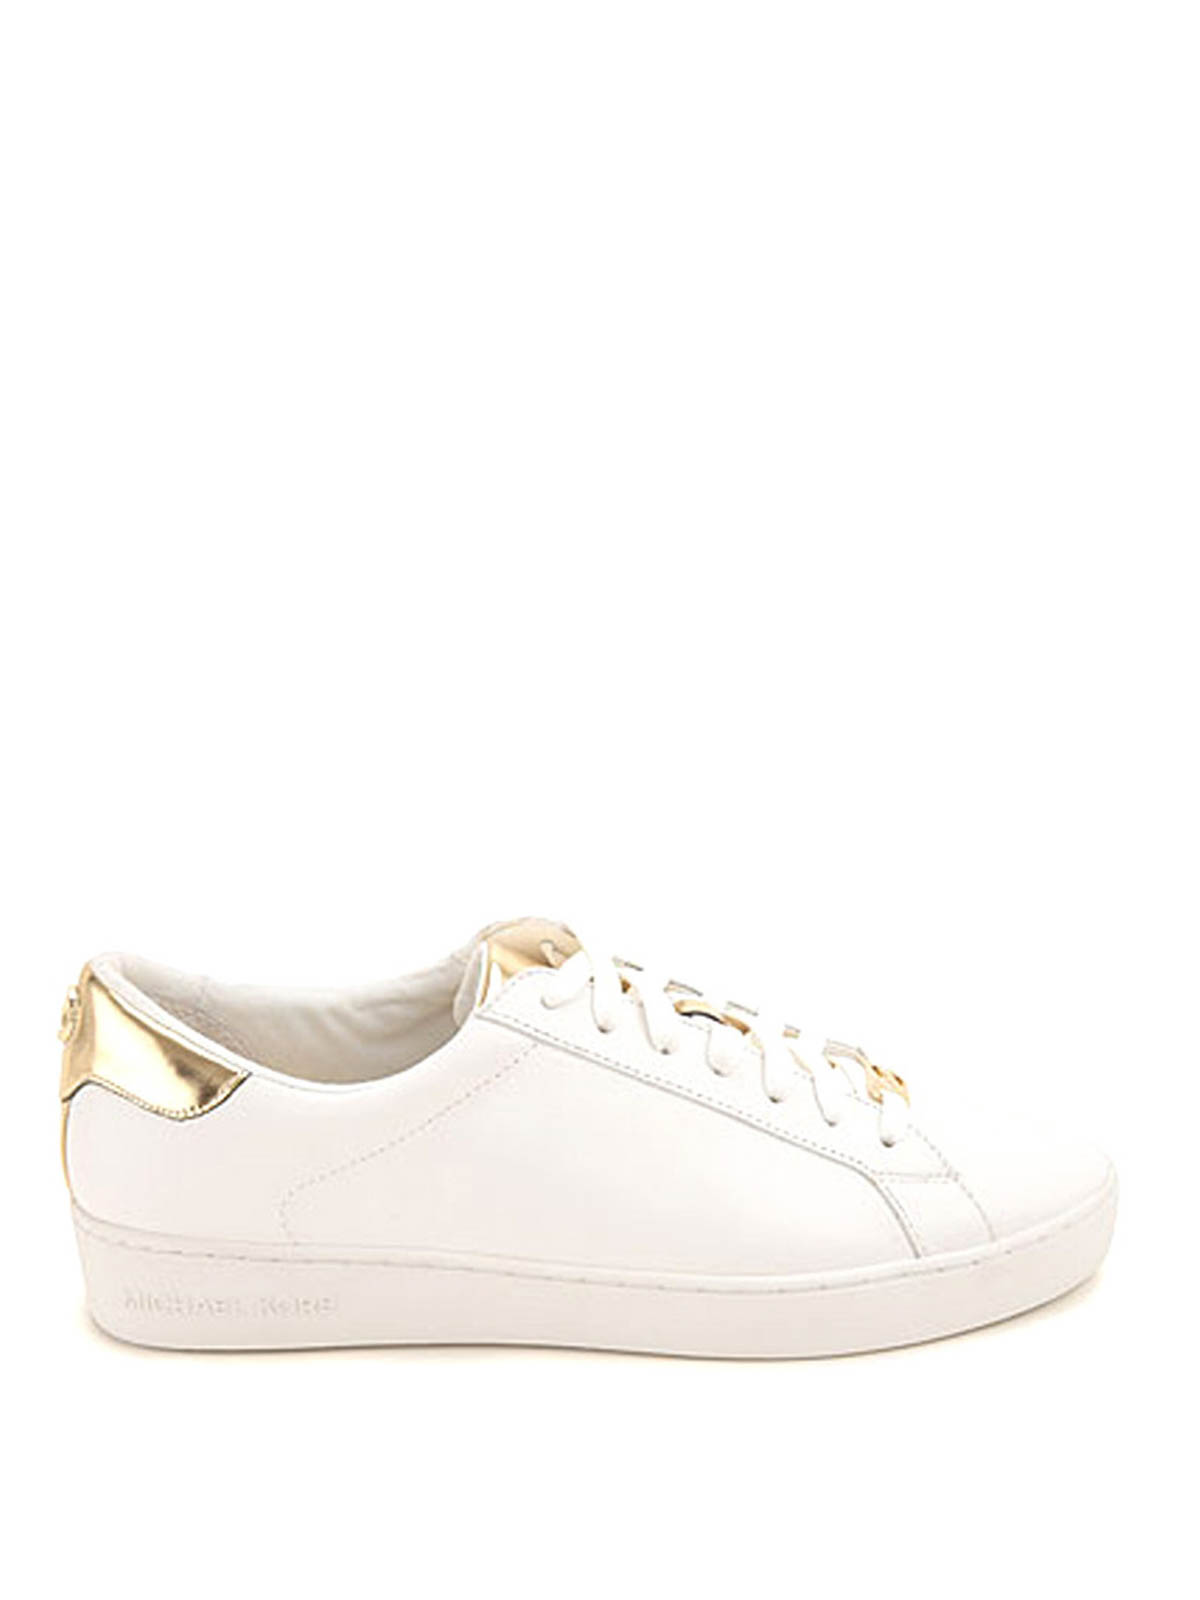 Michael Kors - Irving leather sneakers - trainers - 43S5IRFS2L751